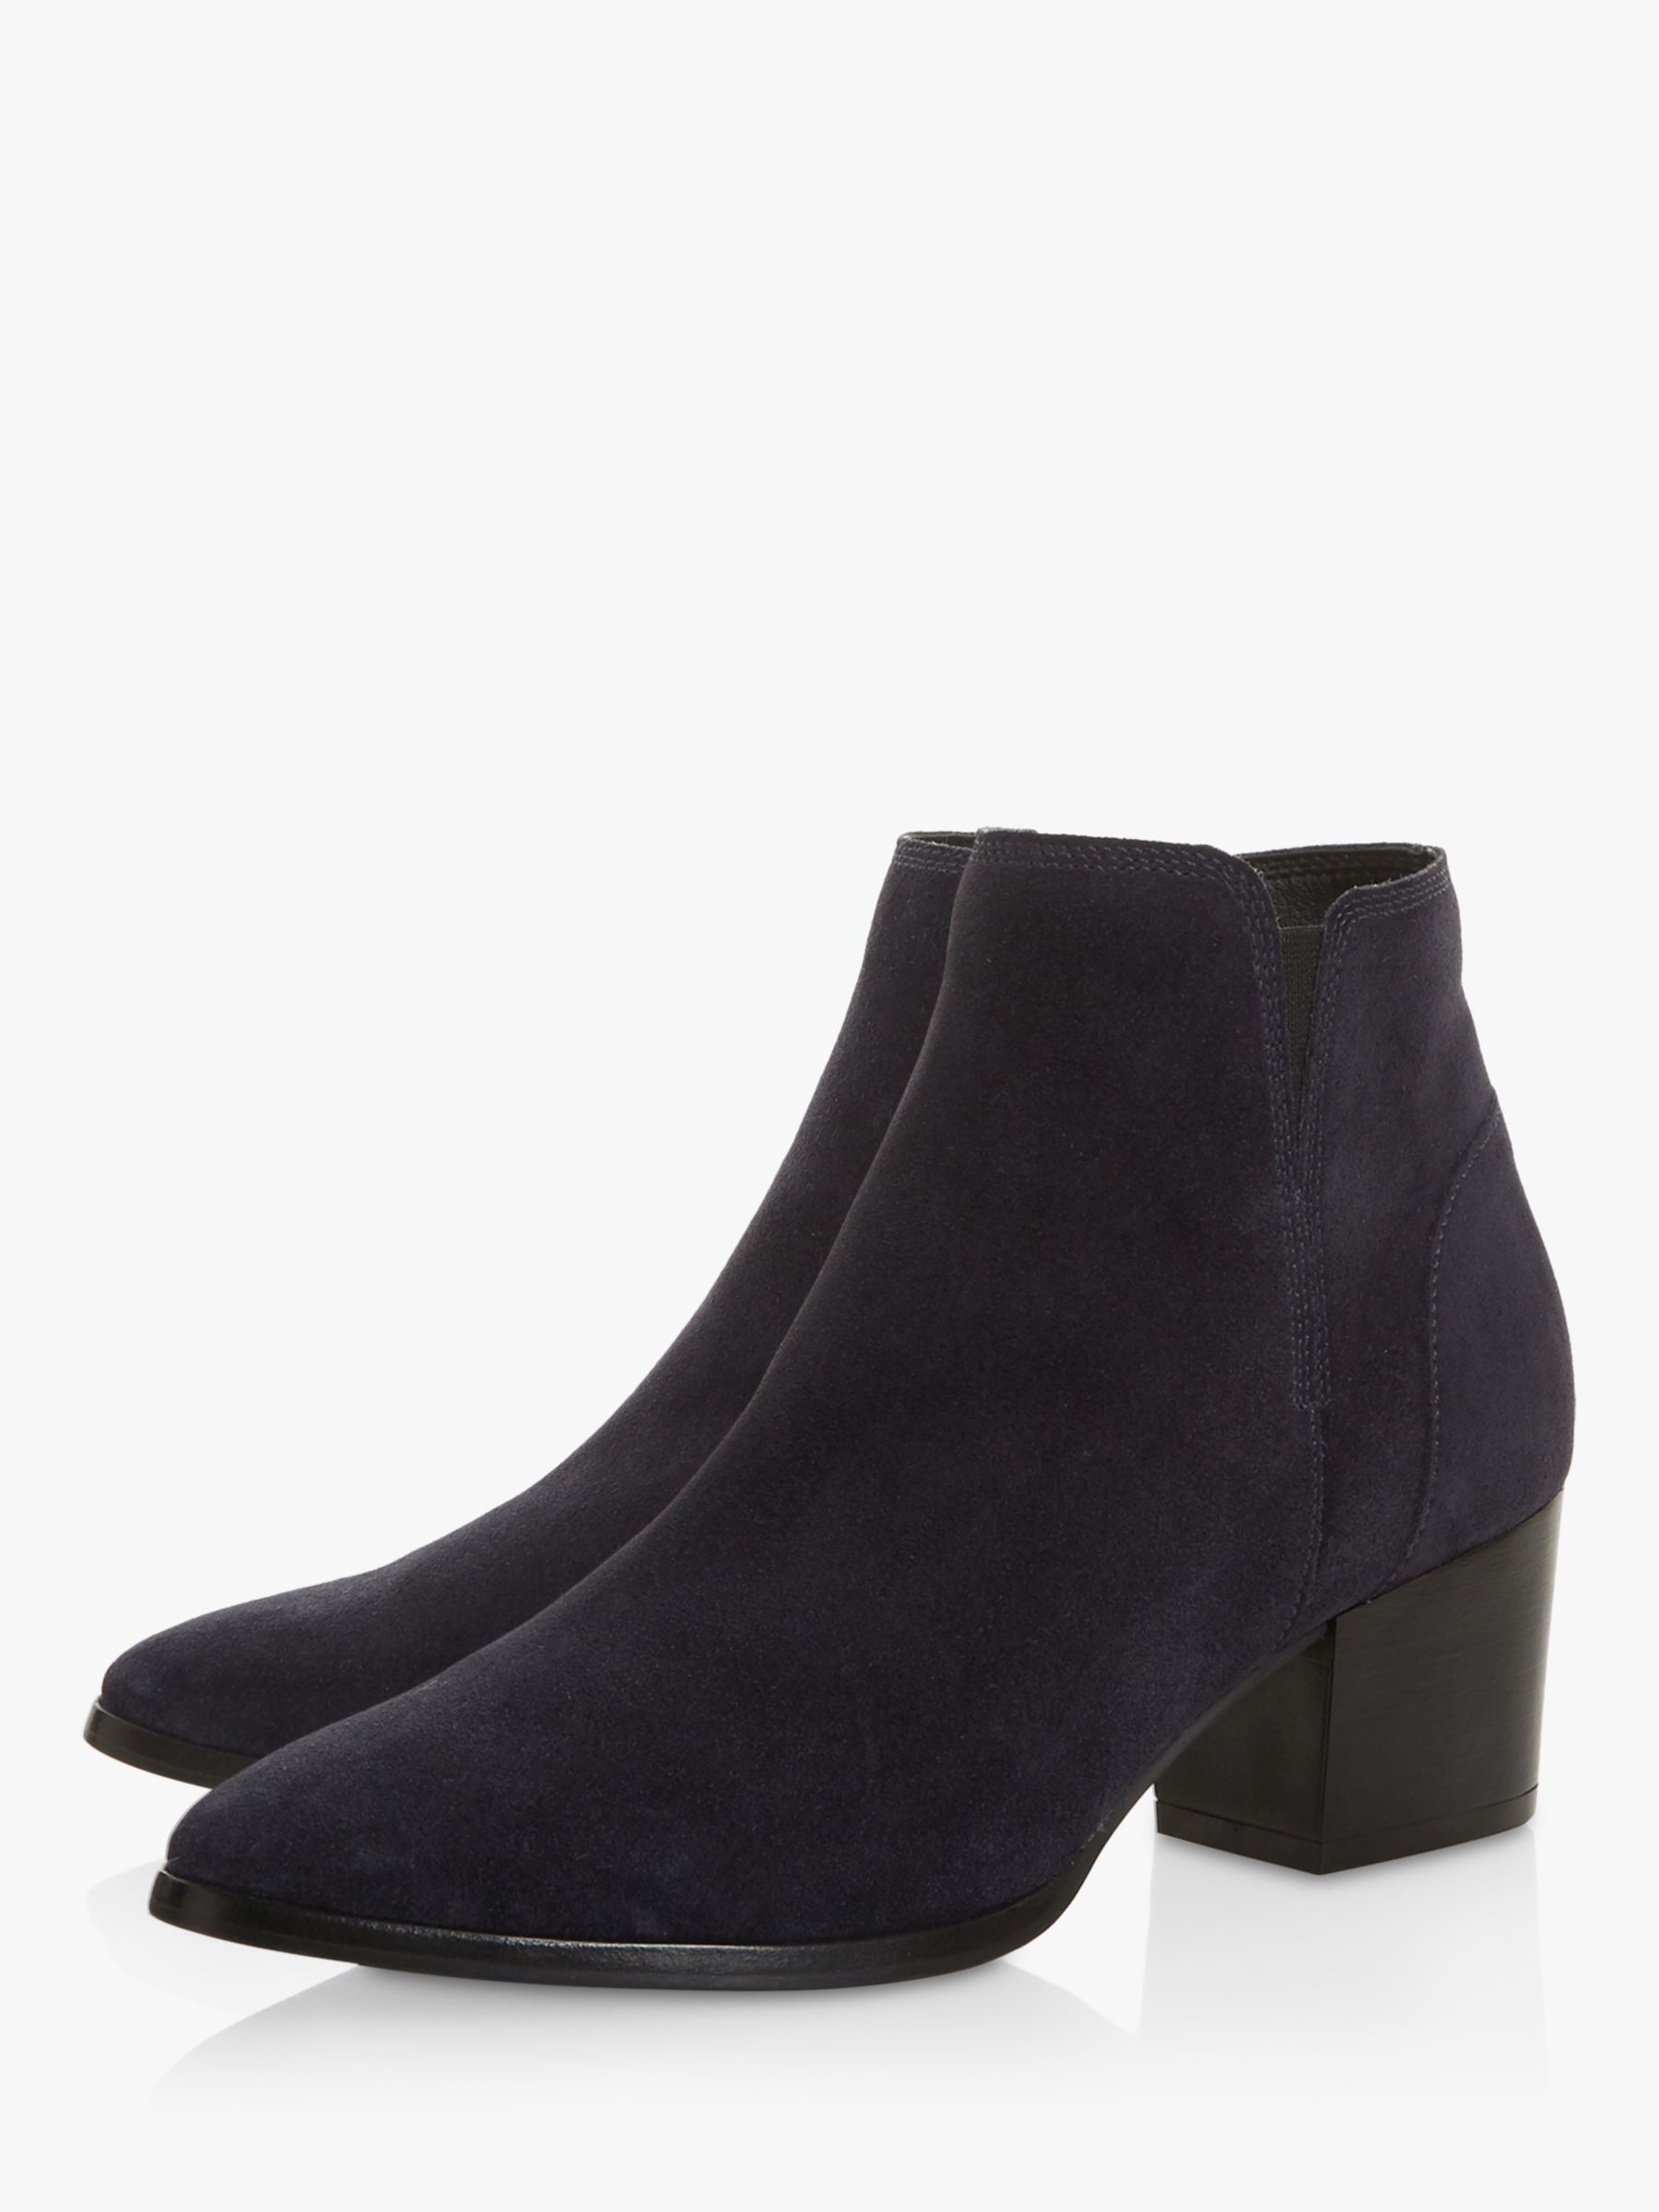 Dune Payge Suede Mid Block Heel Ankle Boots, Navy